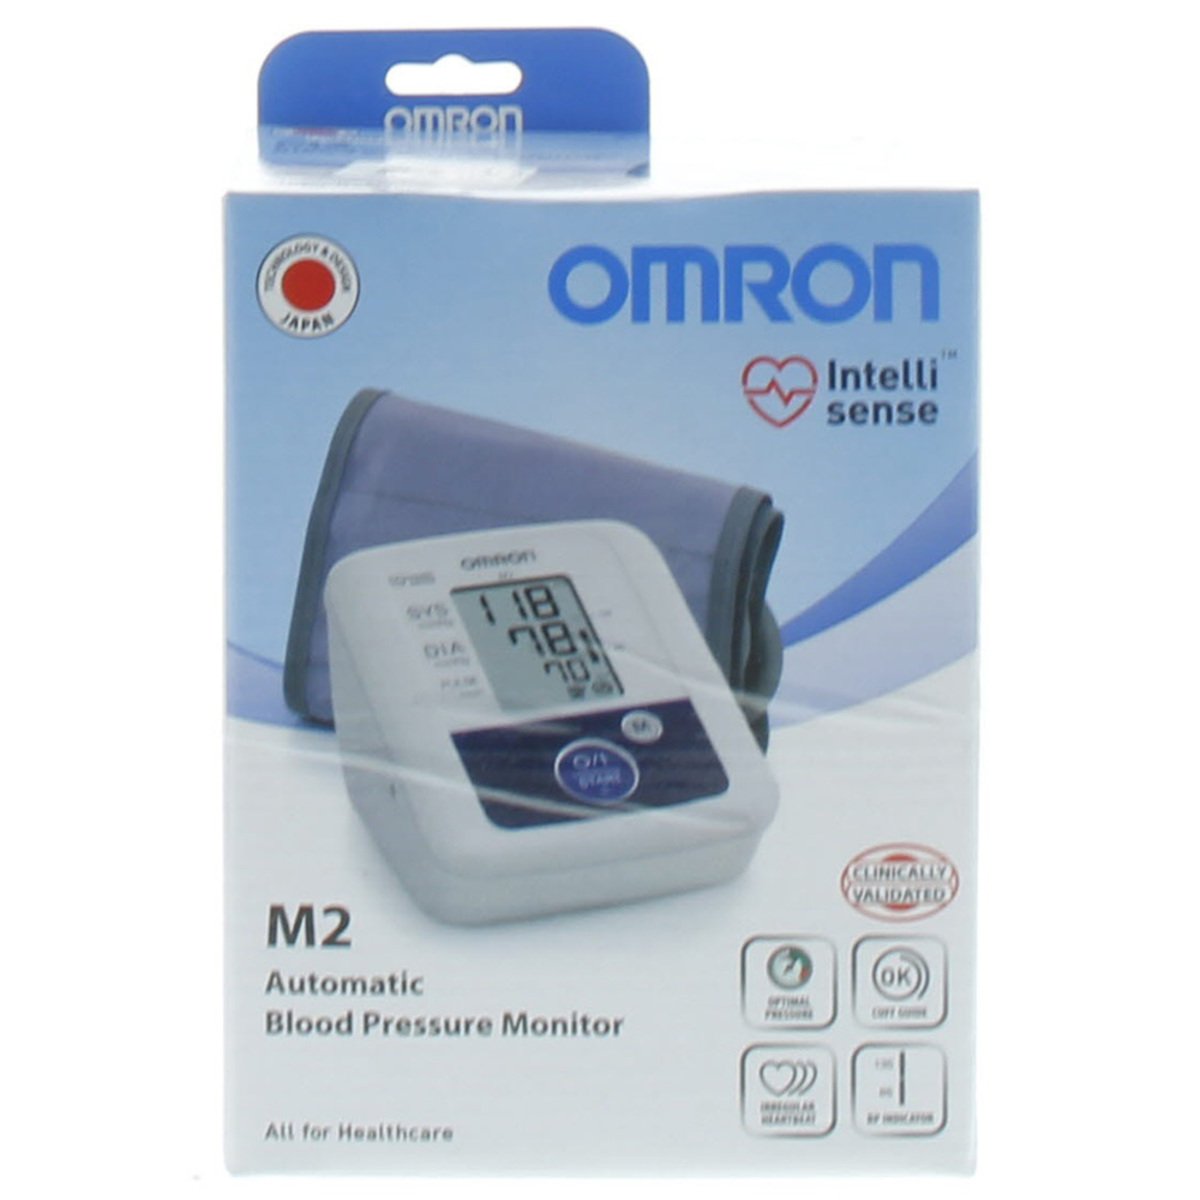 Omron Blood Pressure Monitor M2+Eco Thermometer